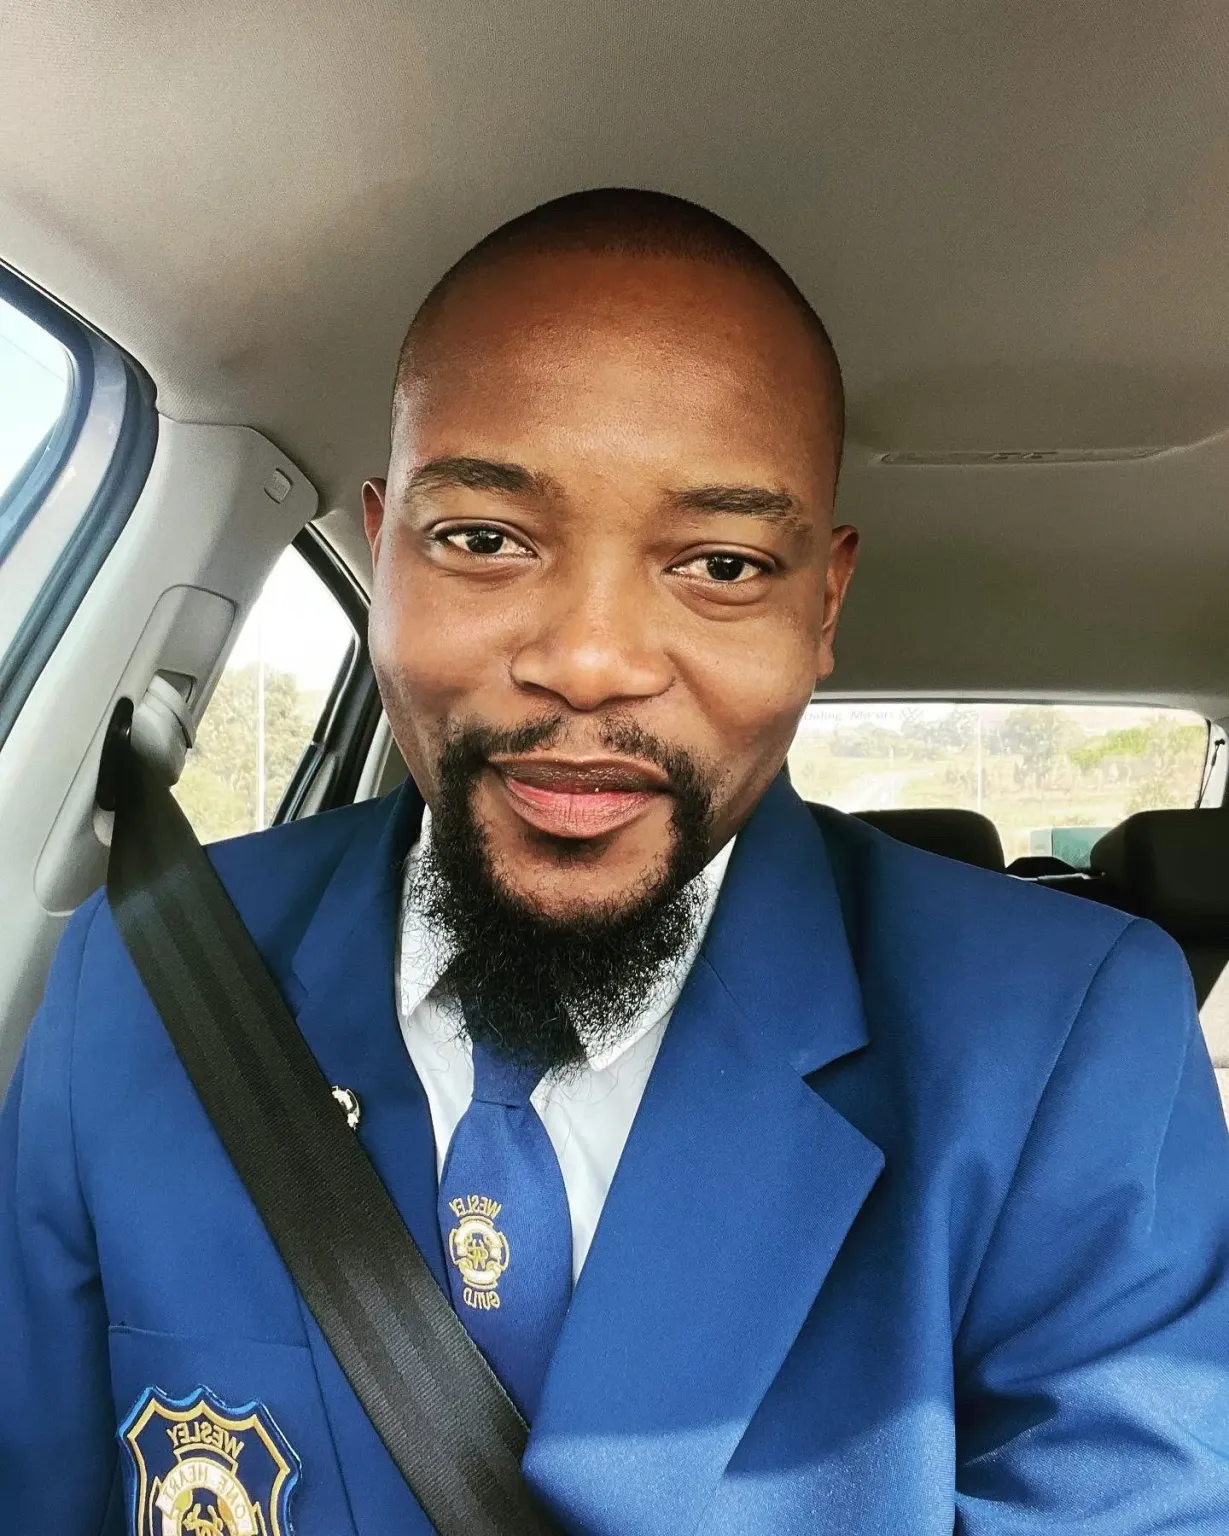 Moshe Ndiki indicates three lessons he has learnt this year